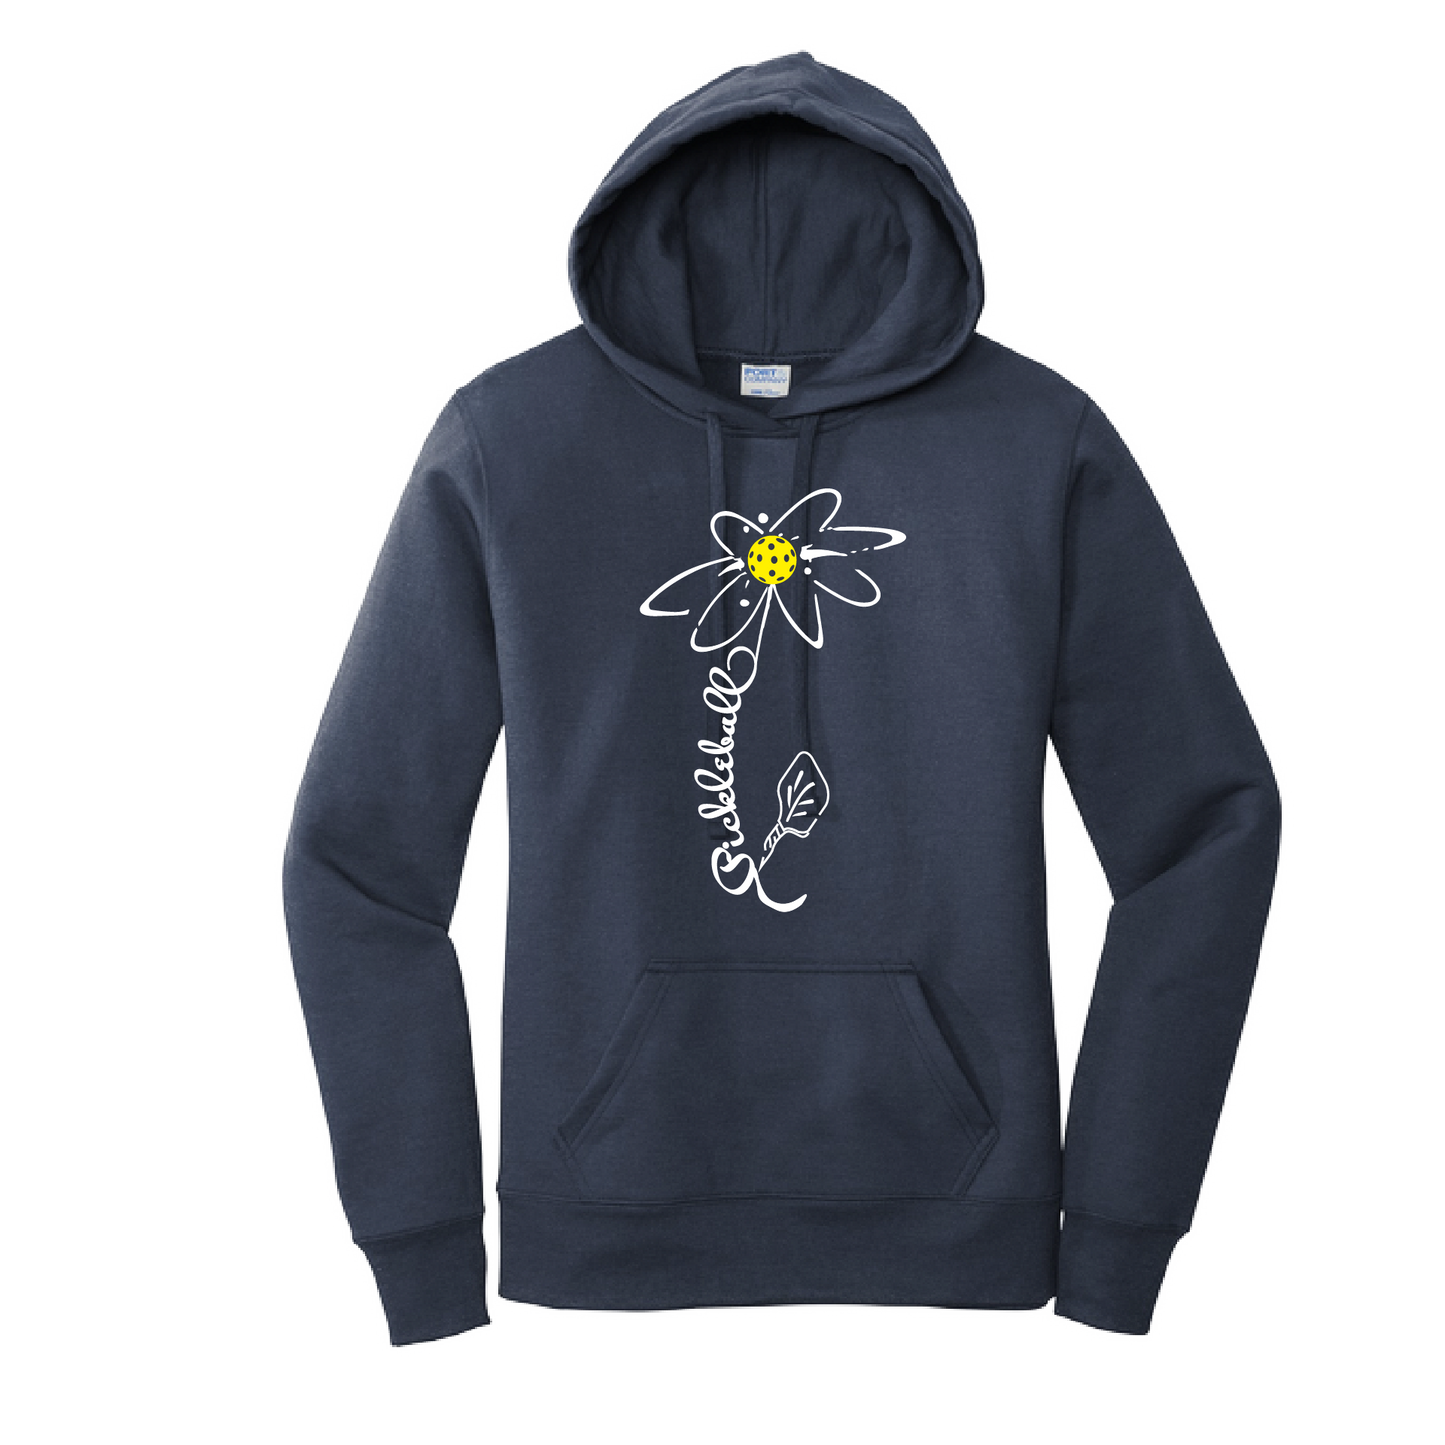 Pickleball Design: Pickleball Flower  Women's Hooded pullover Sweatshirt  Turn up the volume in this Women's Sweatshirts with its perfect mix of softness and attitude. Ultra soft lined inside with a lined hood also. This is fitted nicely for a women's figure. Front pouch pocket.